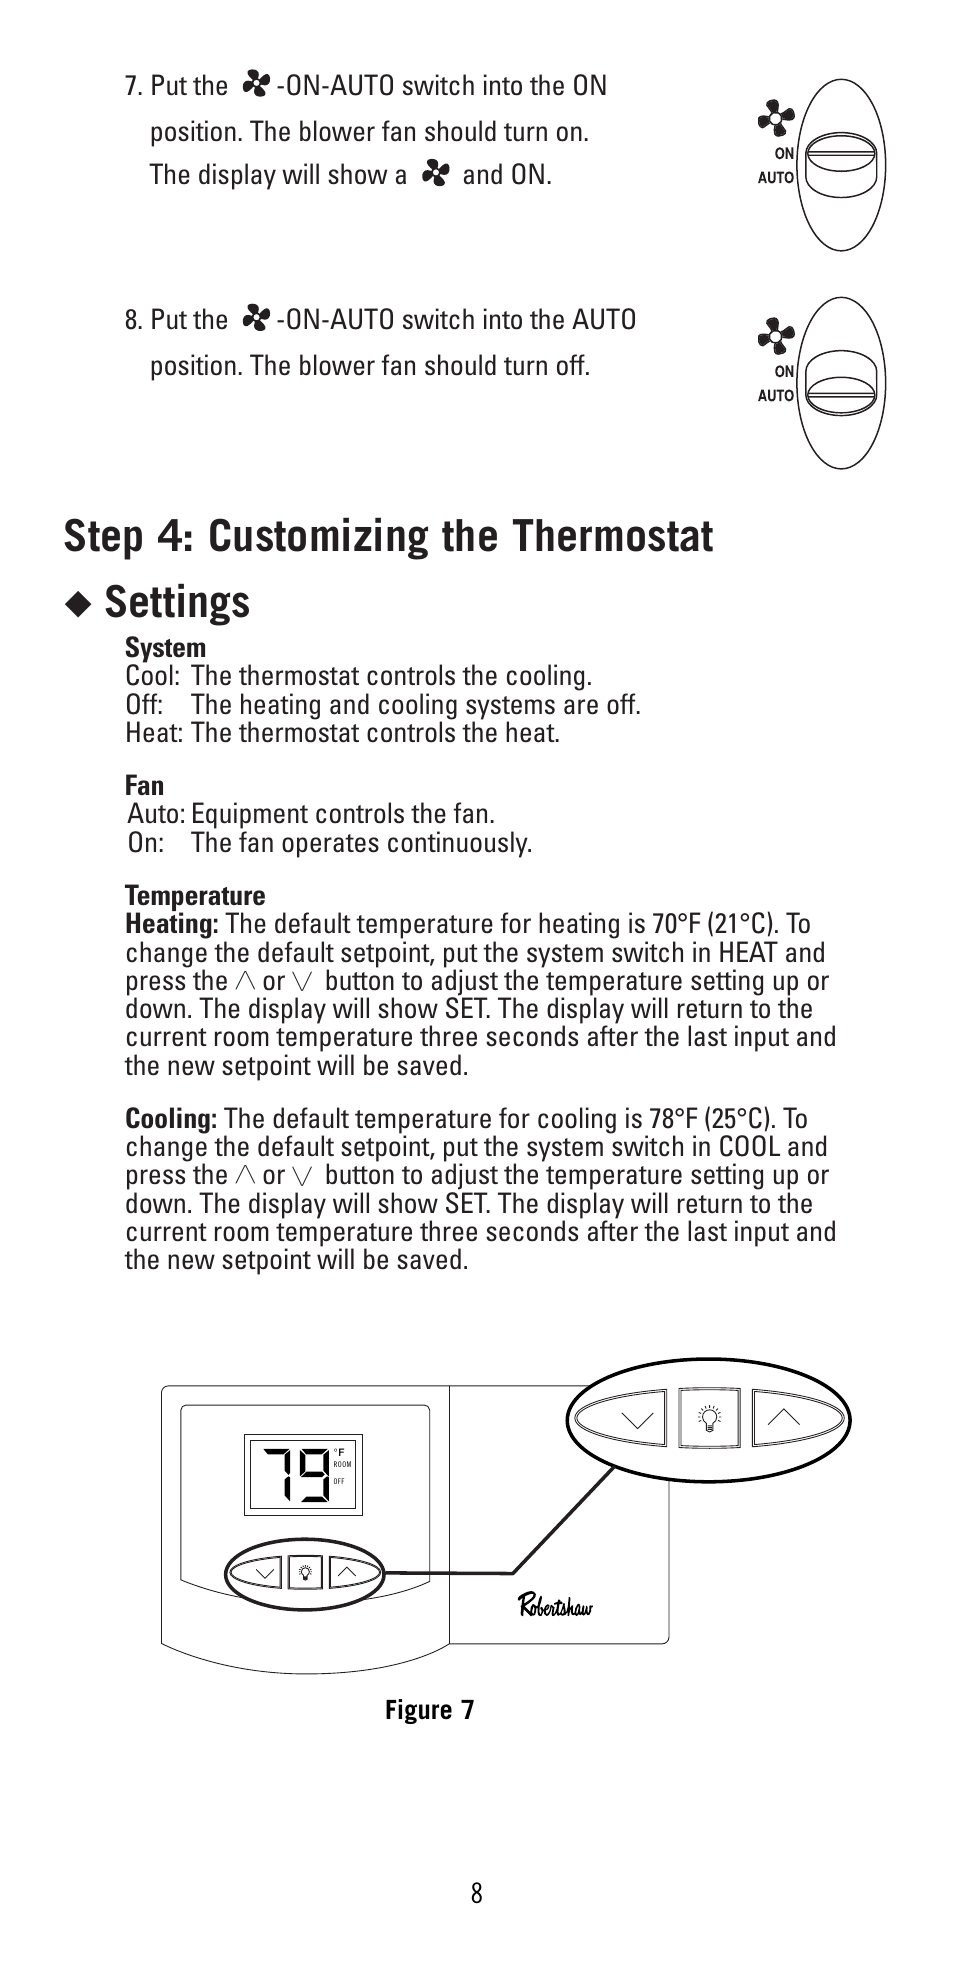 Step 4: customizing the thermostat, Settings | Robertshaw 9400 User